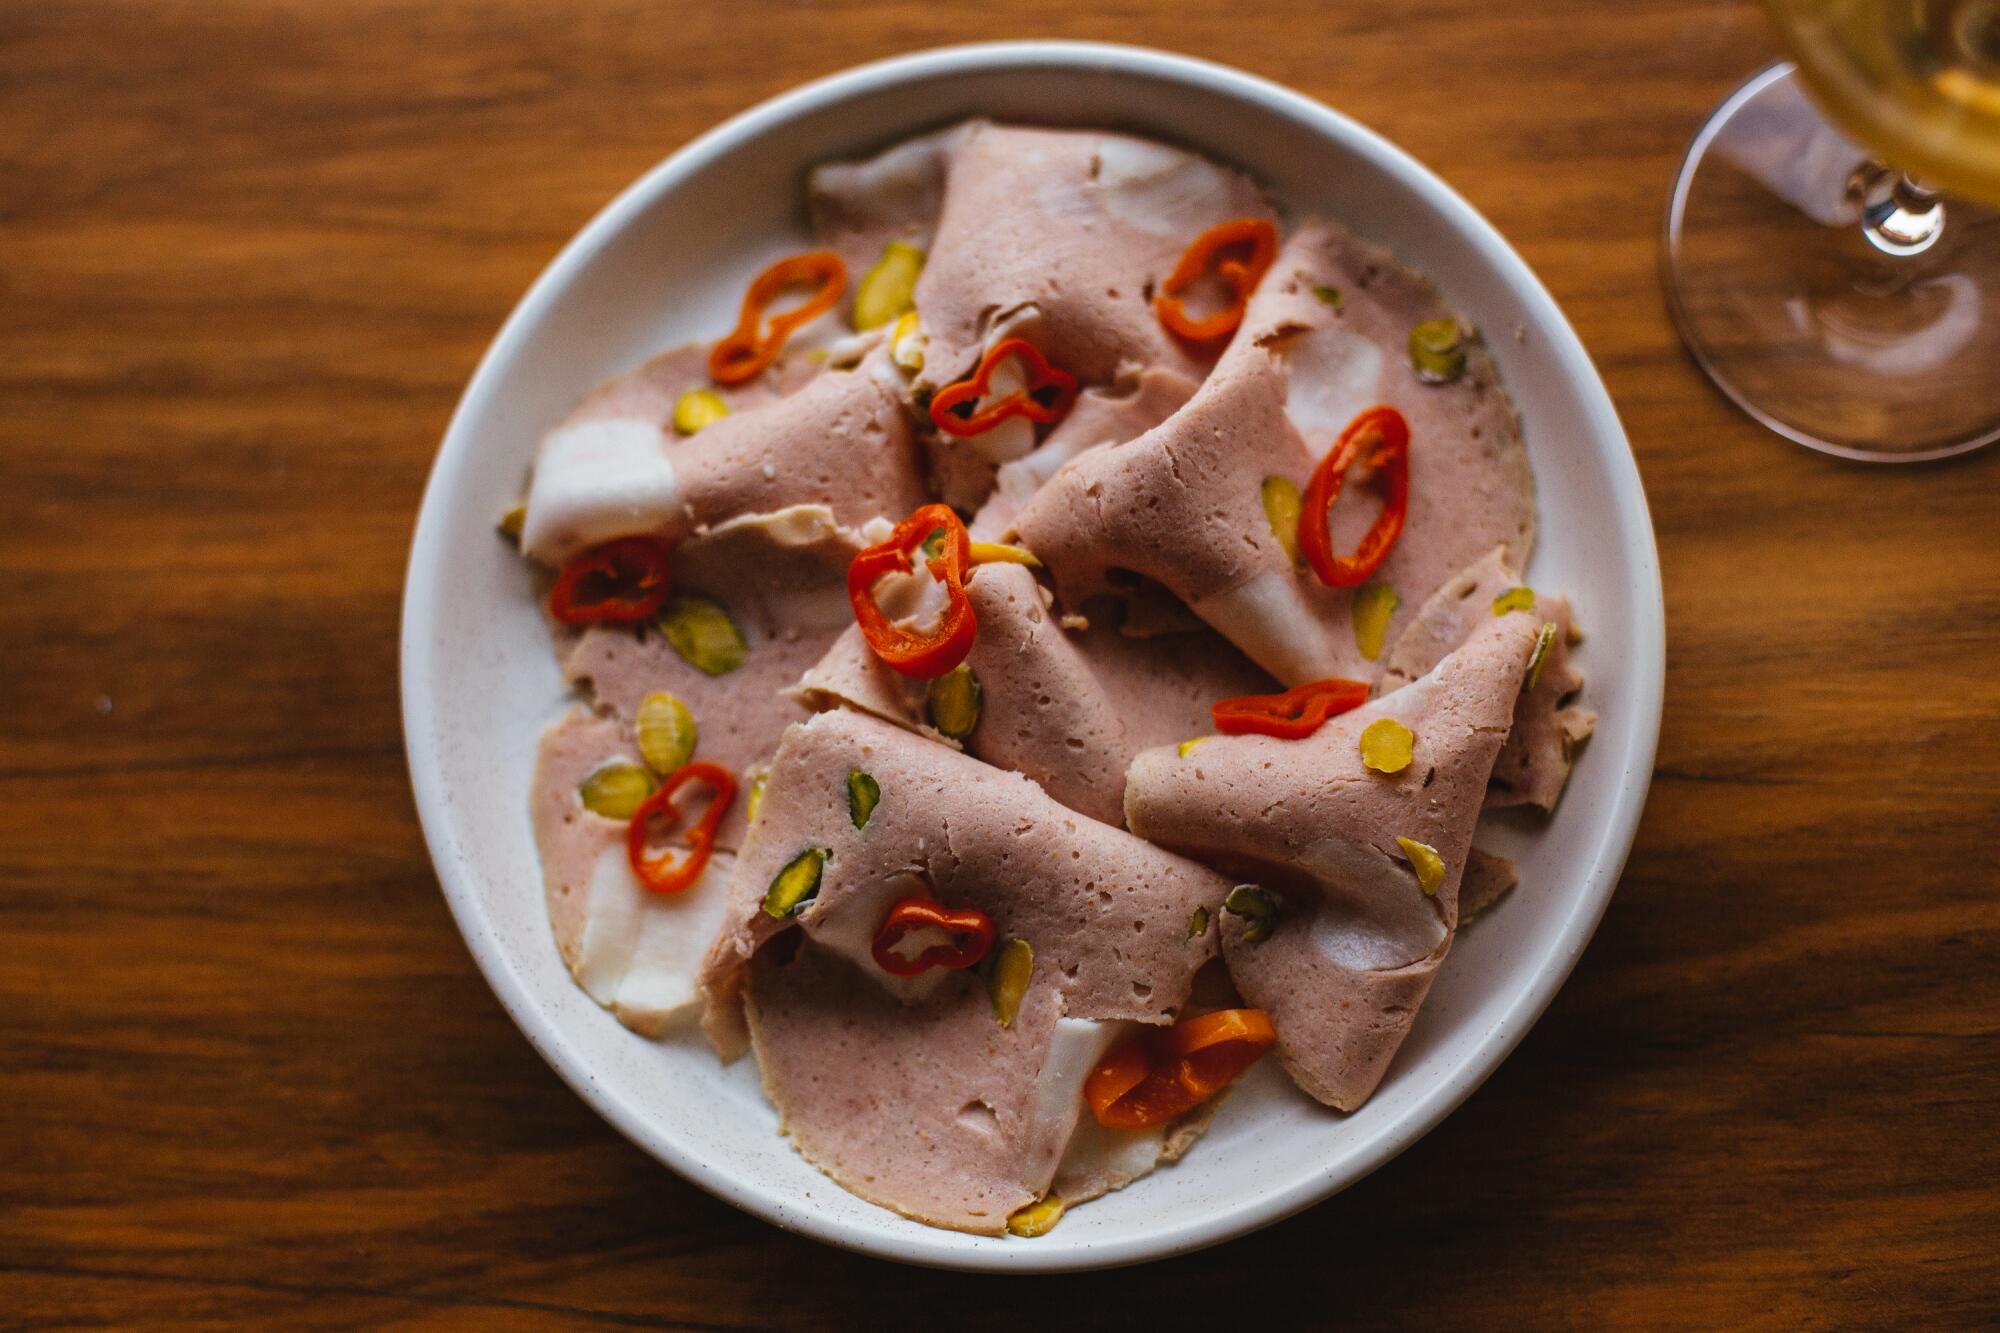 Slices of mortadella with sliced chili peppers scattered over them.